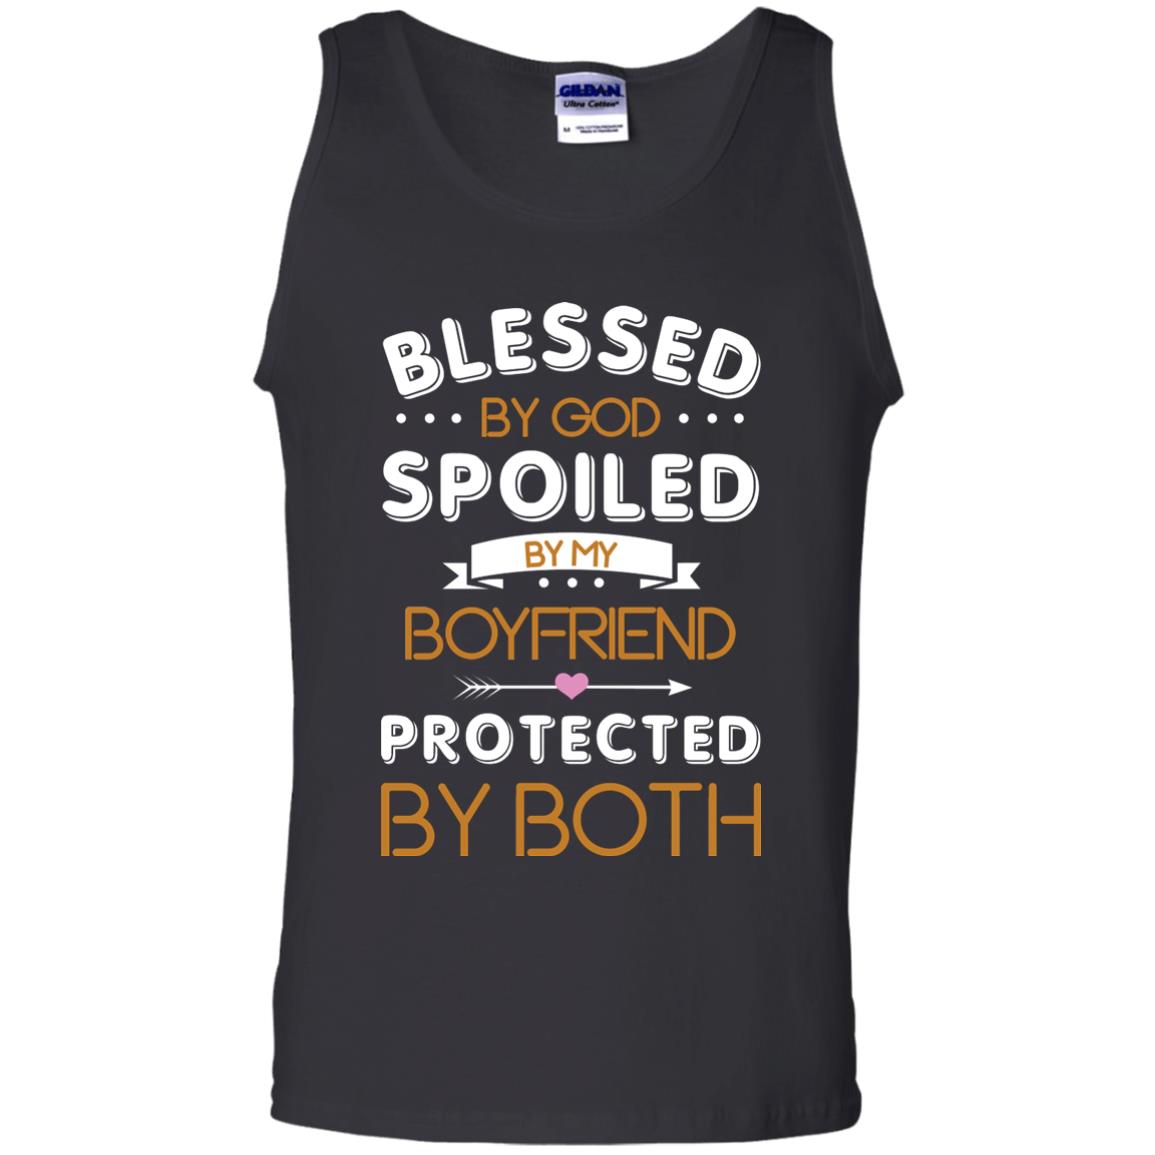 Blessed By God Spoiled By My Boyfriend Protected By  Both ShirtG220 Gildan 100% Cotton Tank Top